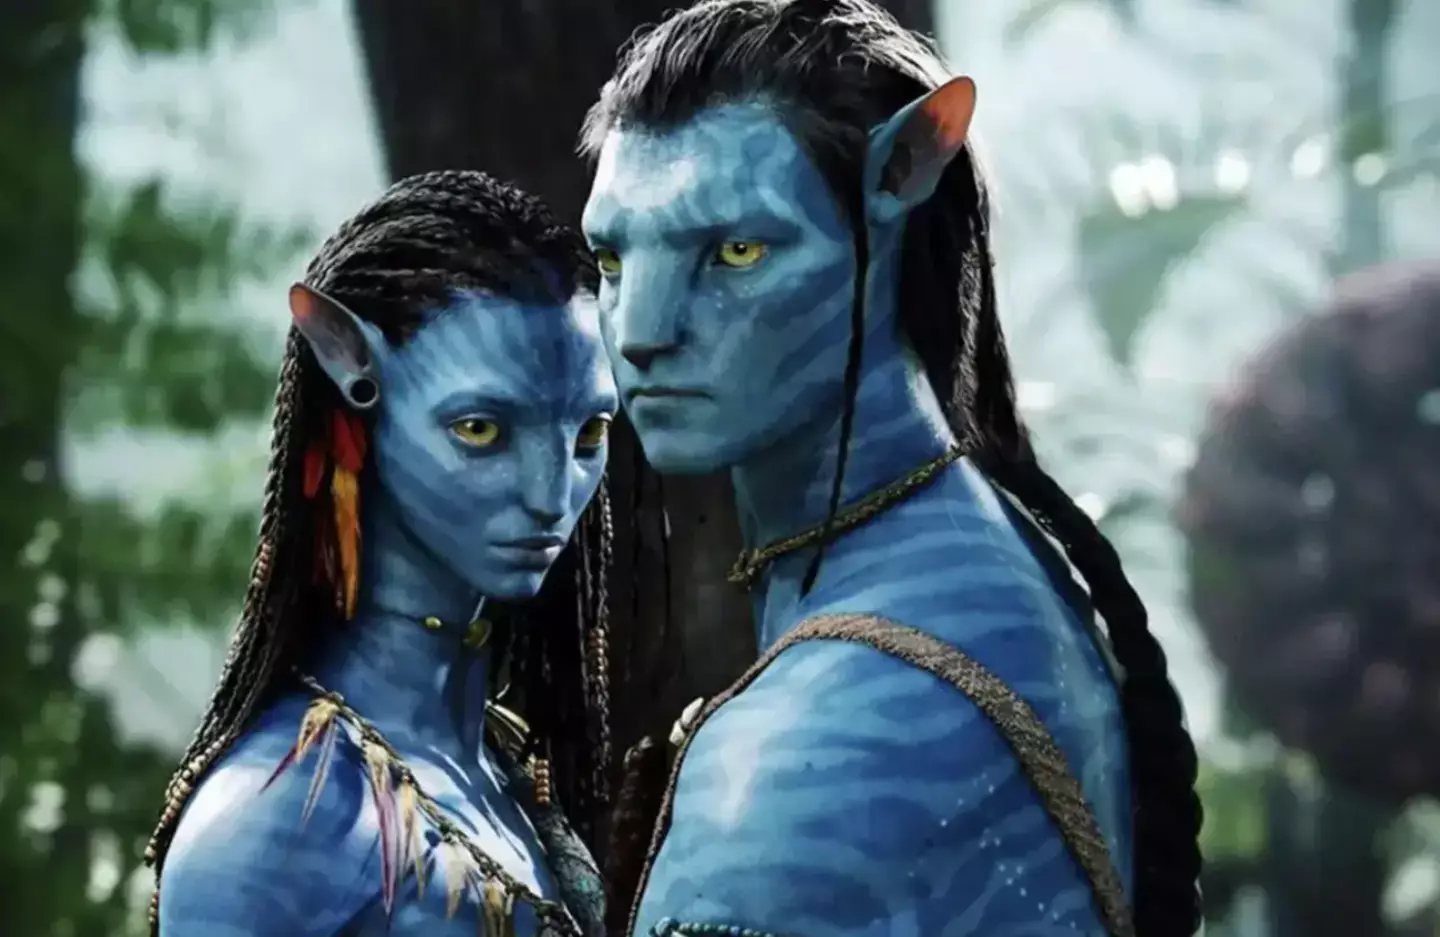 Avatar 2 will be released 13 years after the original.